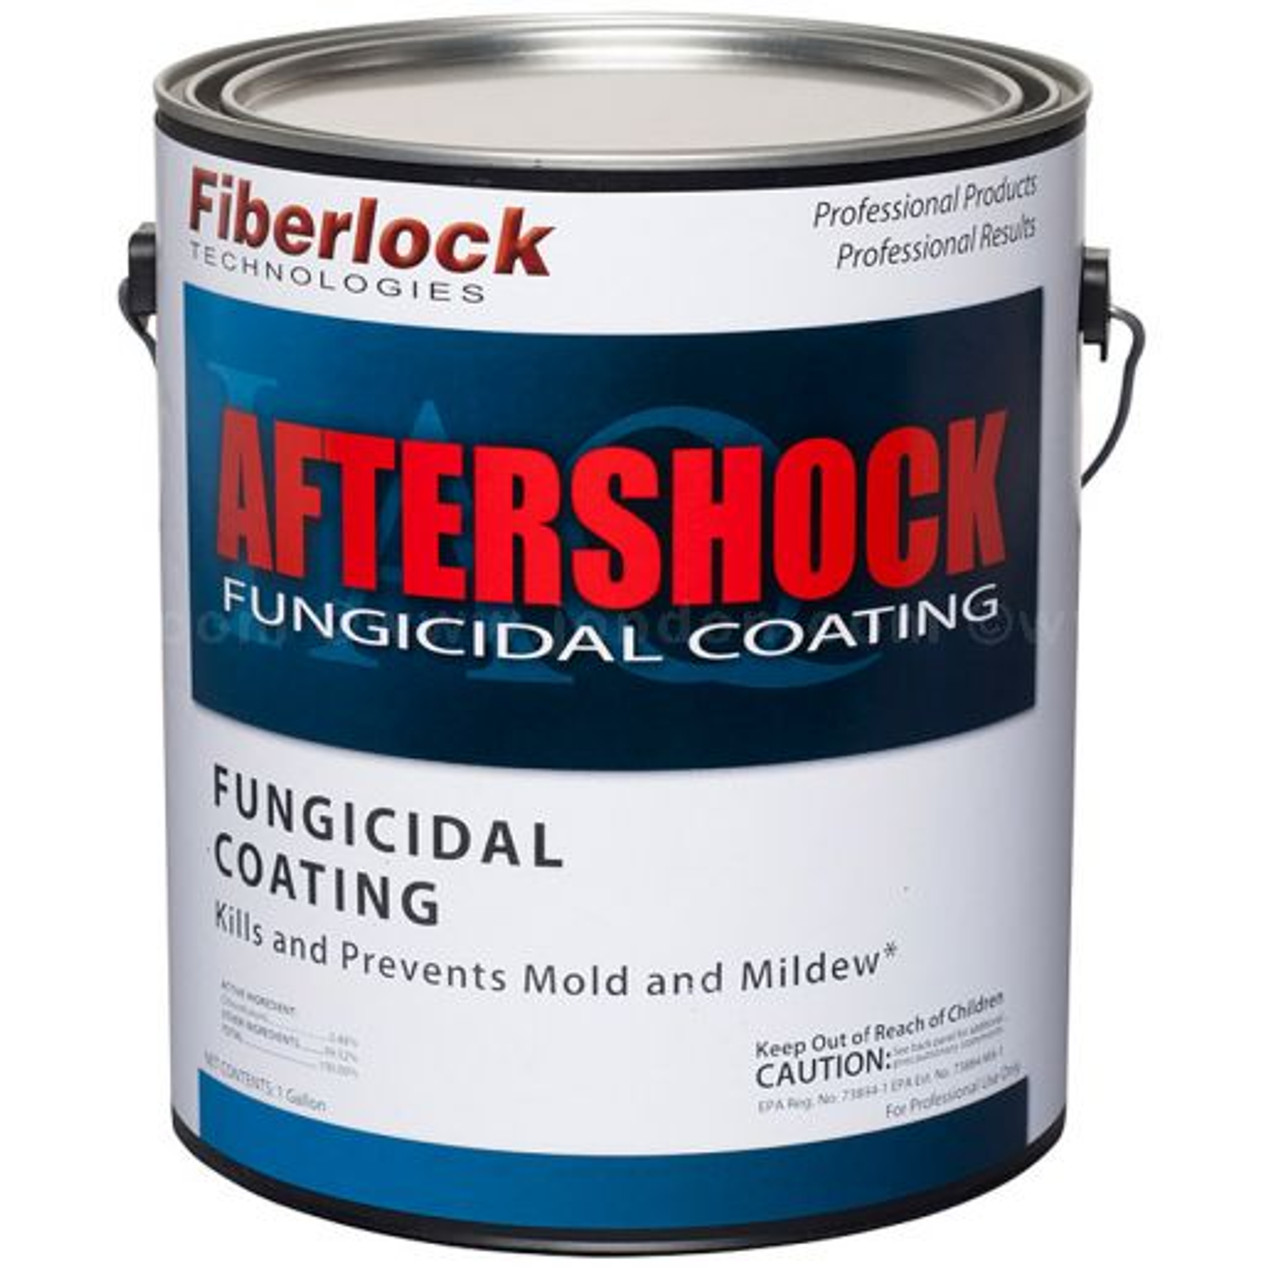 Aftershock Fungicdal Coating CASE of 4